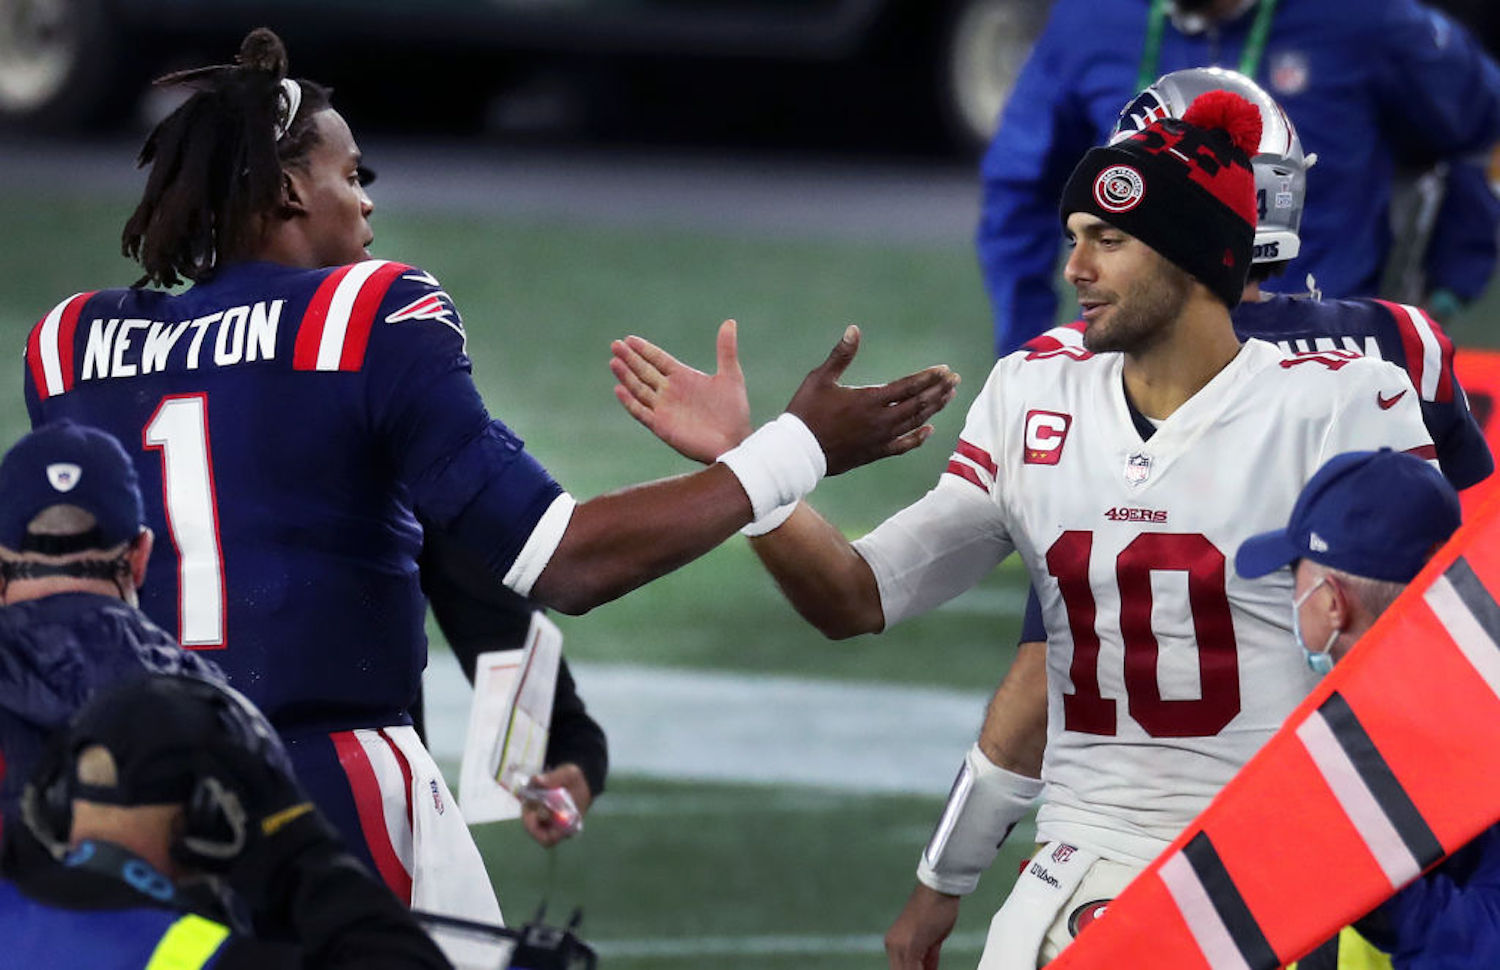 Bill Belichick traded Jimmy Garoppolo to the San Francisco 49ers in 2017, and the QB just made him severely regret that decision.